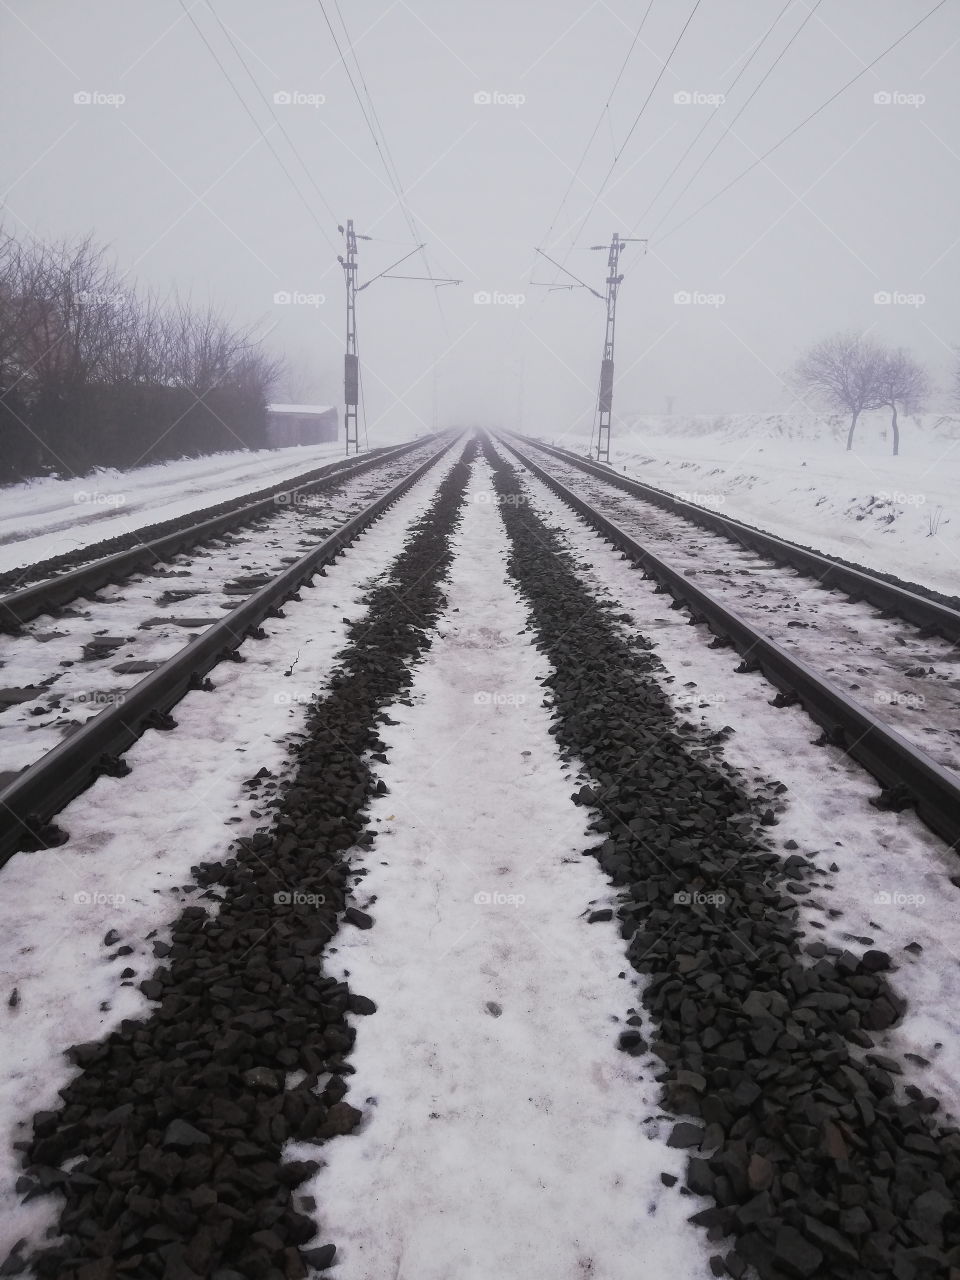 A picture of 2 rail line going far away